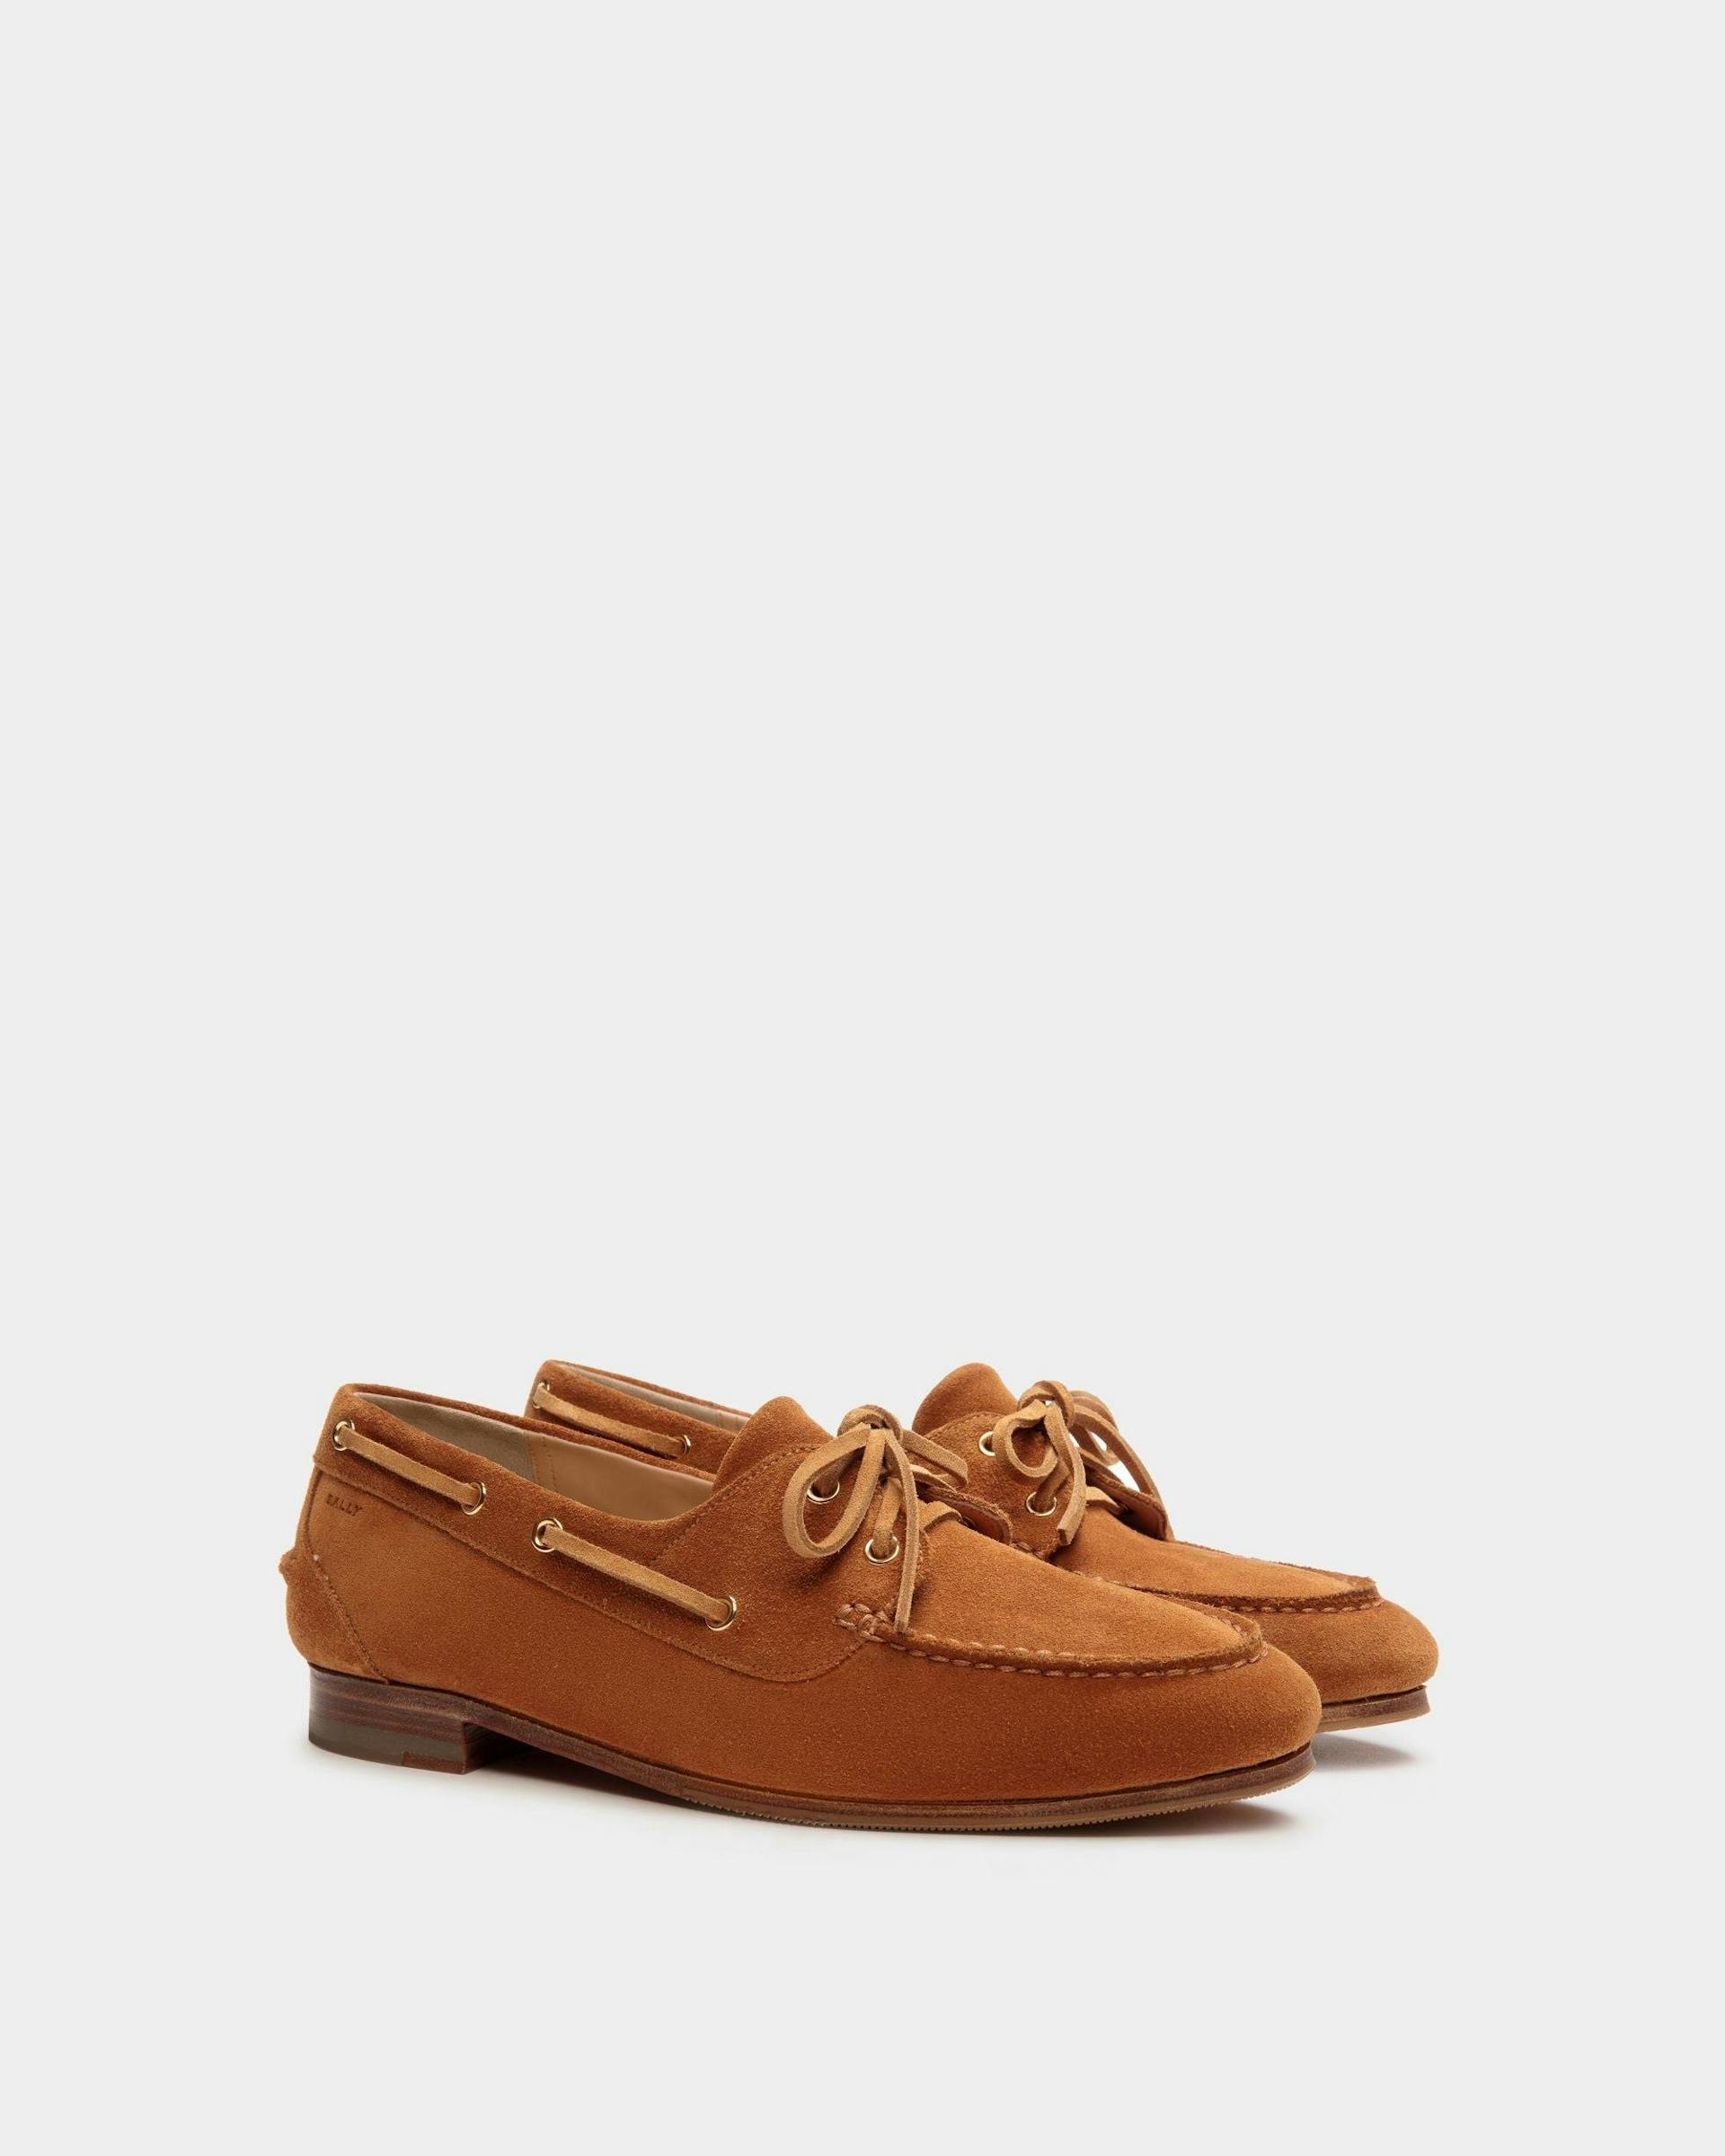 Women's Plume Moccasin in Brown Suede | Bally | Still Life 3/4 Front